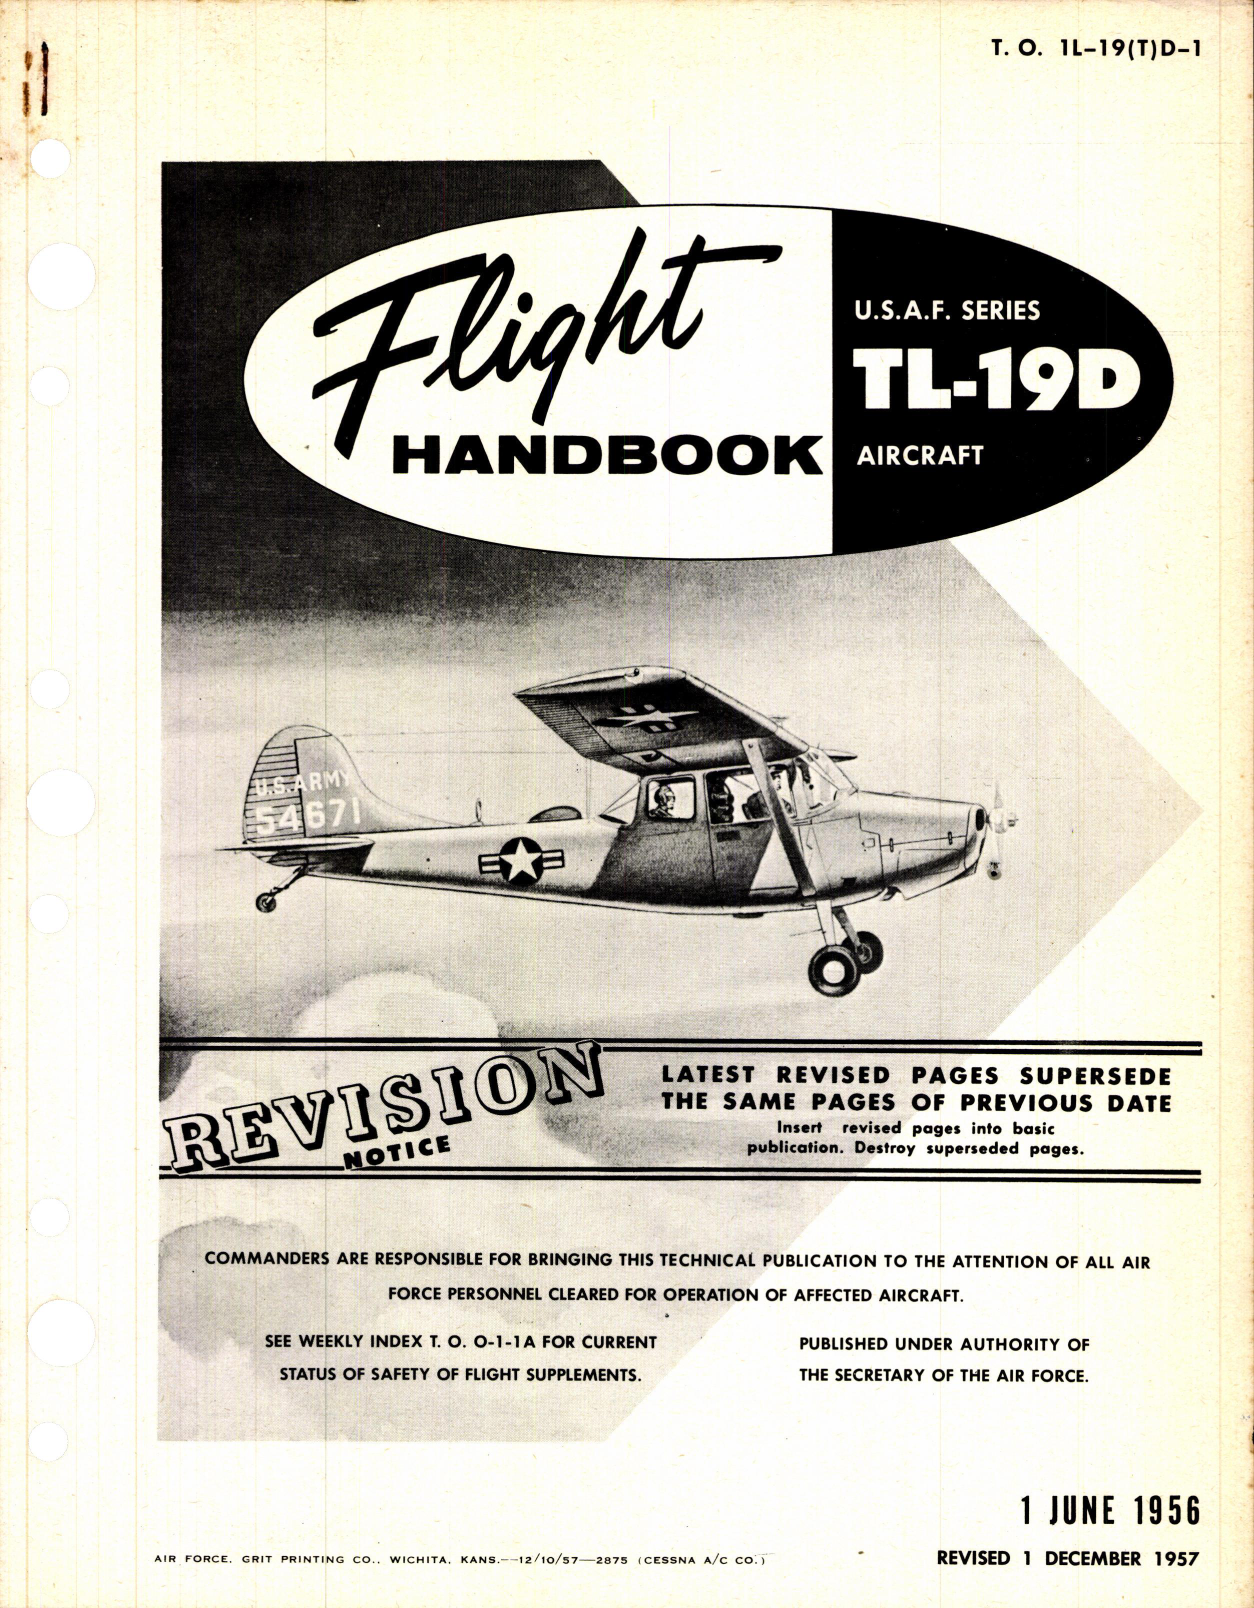 Sample page 1 from AirCorps Library document: Flight Handbook for TL-19D Aircraft